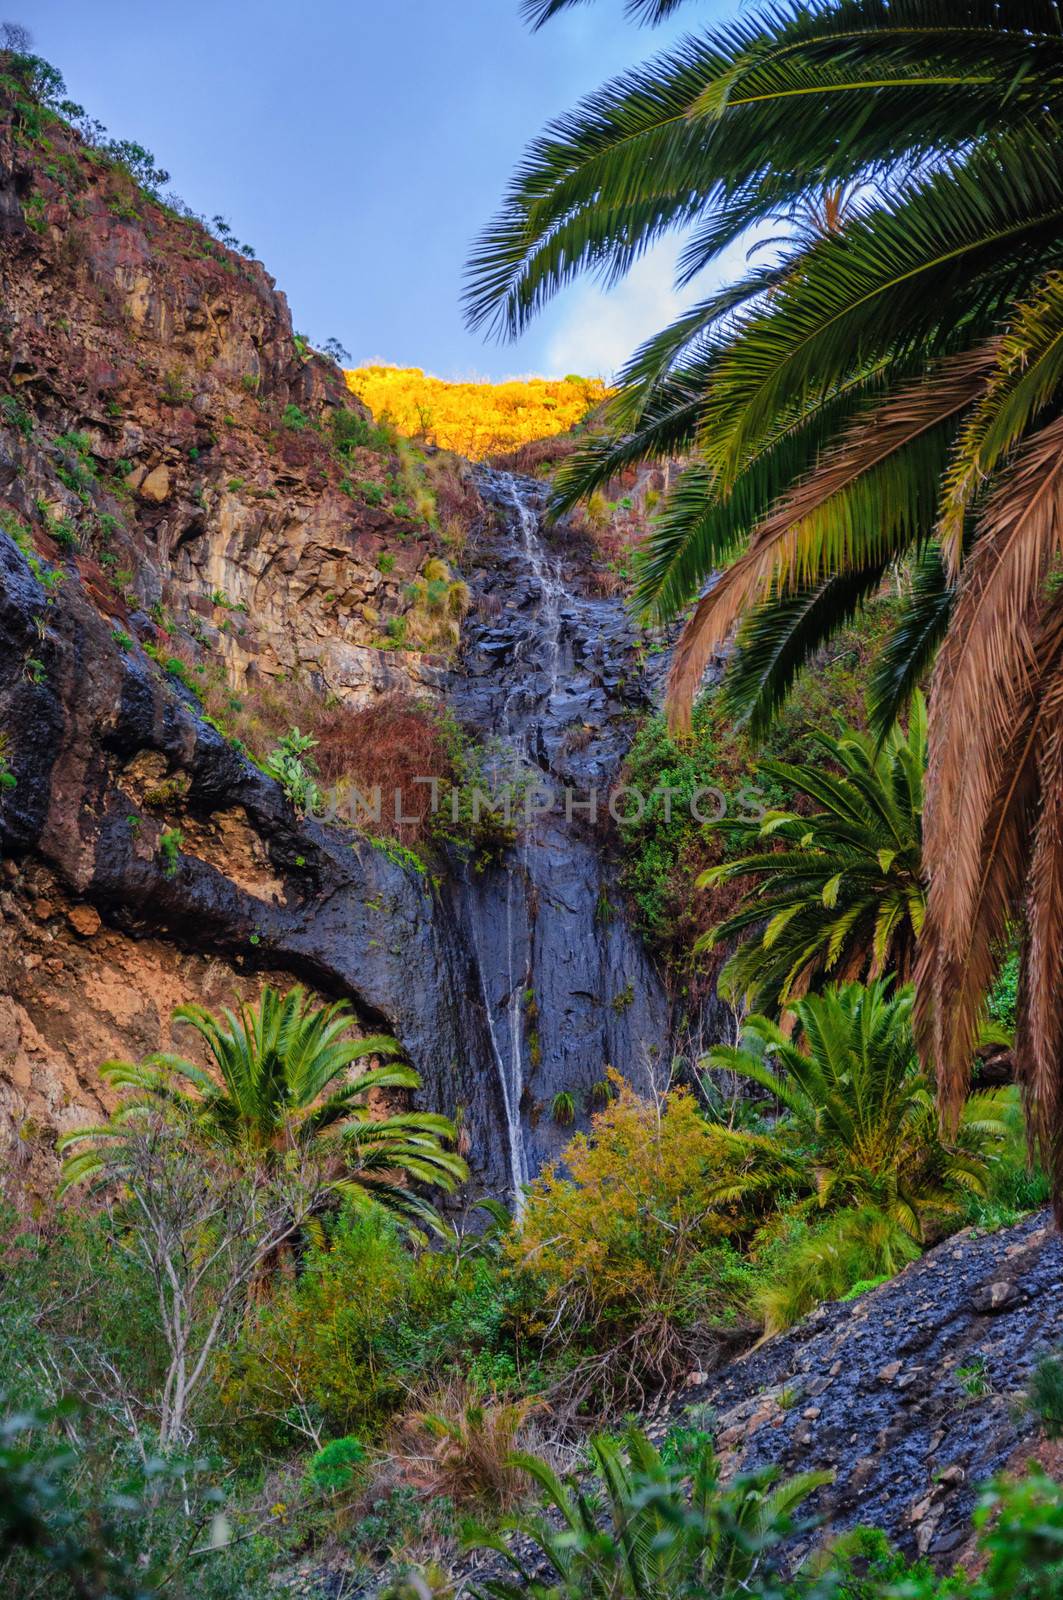 Waterfall near Masca village with mountains, Tenerife, Canarian  by Eagle2308